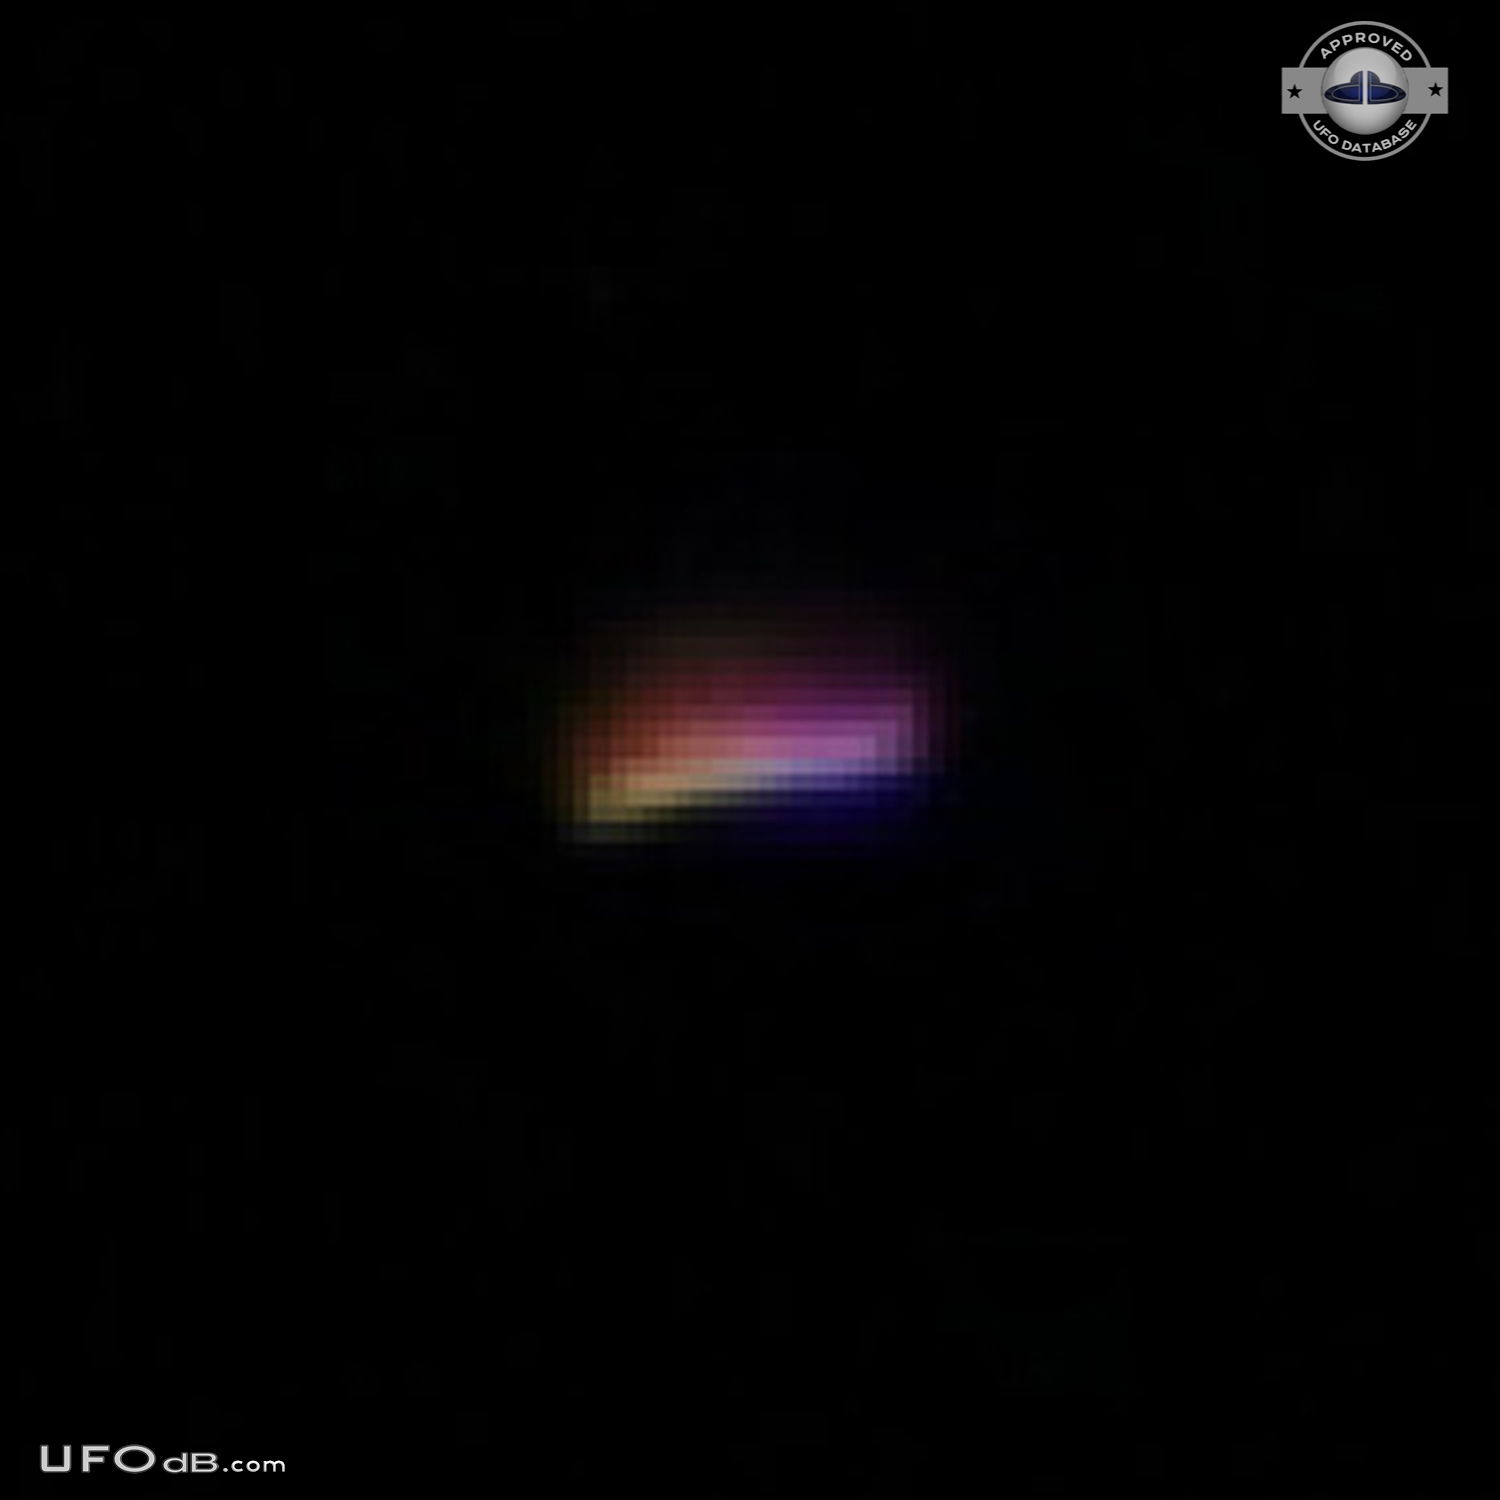 Bright mufti-colored flashing pulsating UFO on pictures - Florida 2012 UFO Picture #524-5